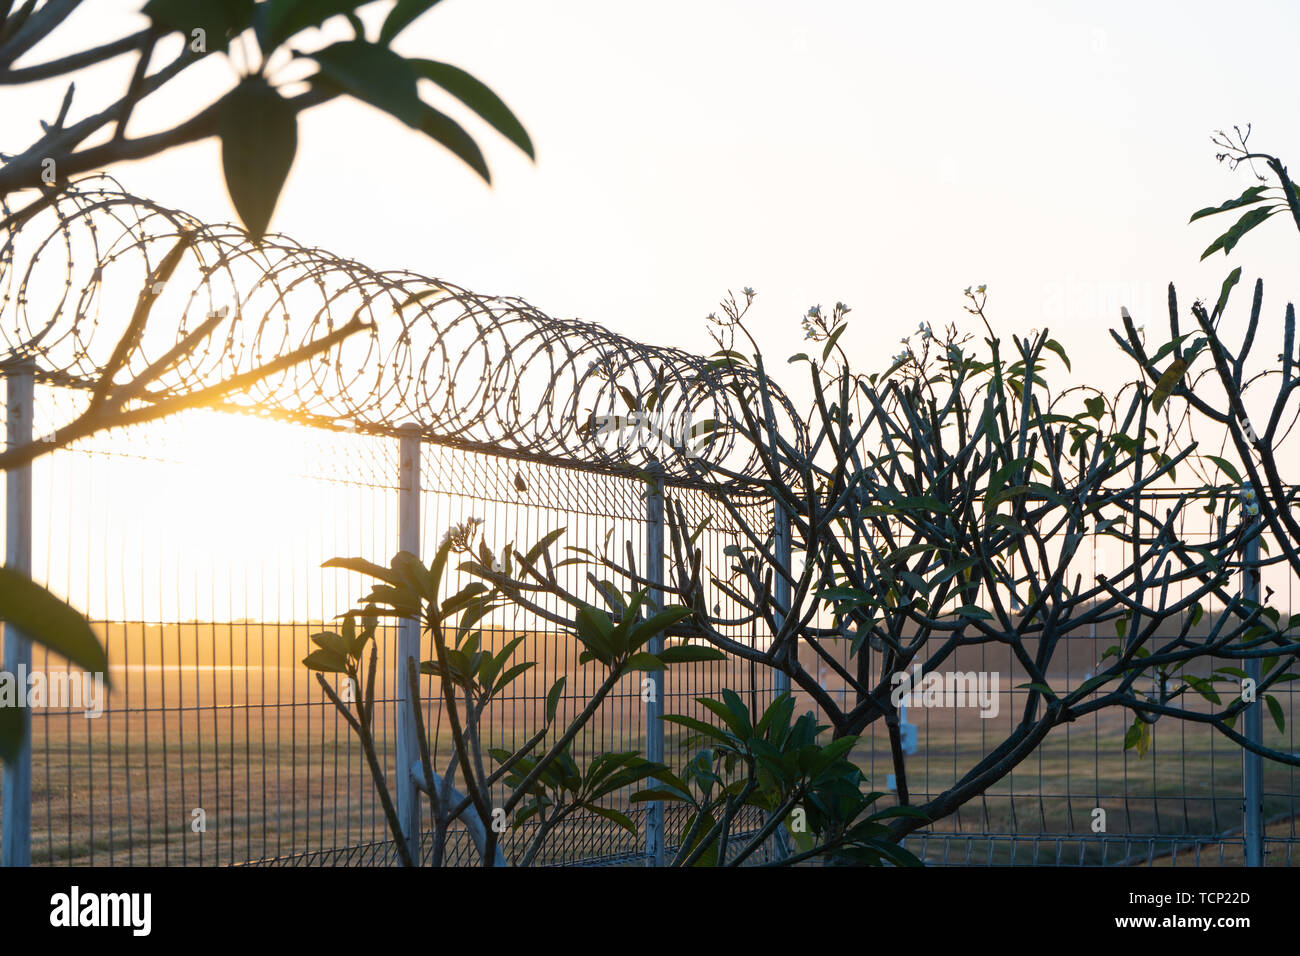 Sunrise in the morning in a place surrounded by barbed guardrails and small tree. A jail or prison concept Stock Photo